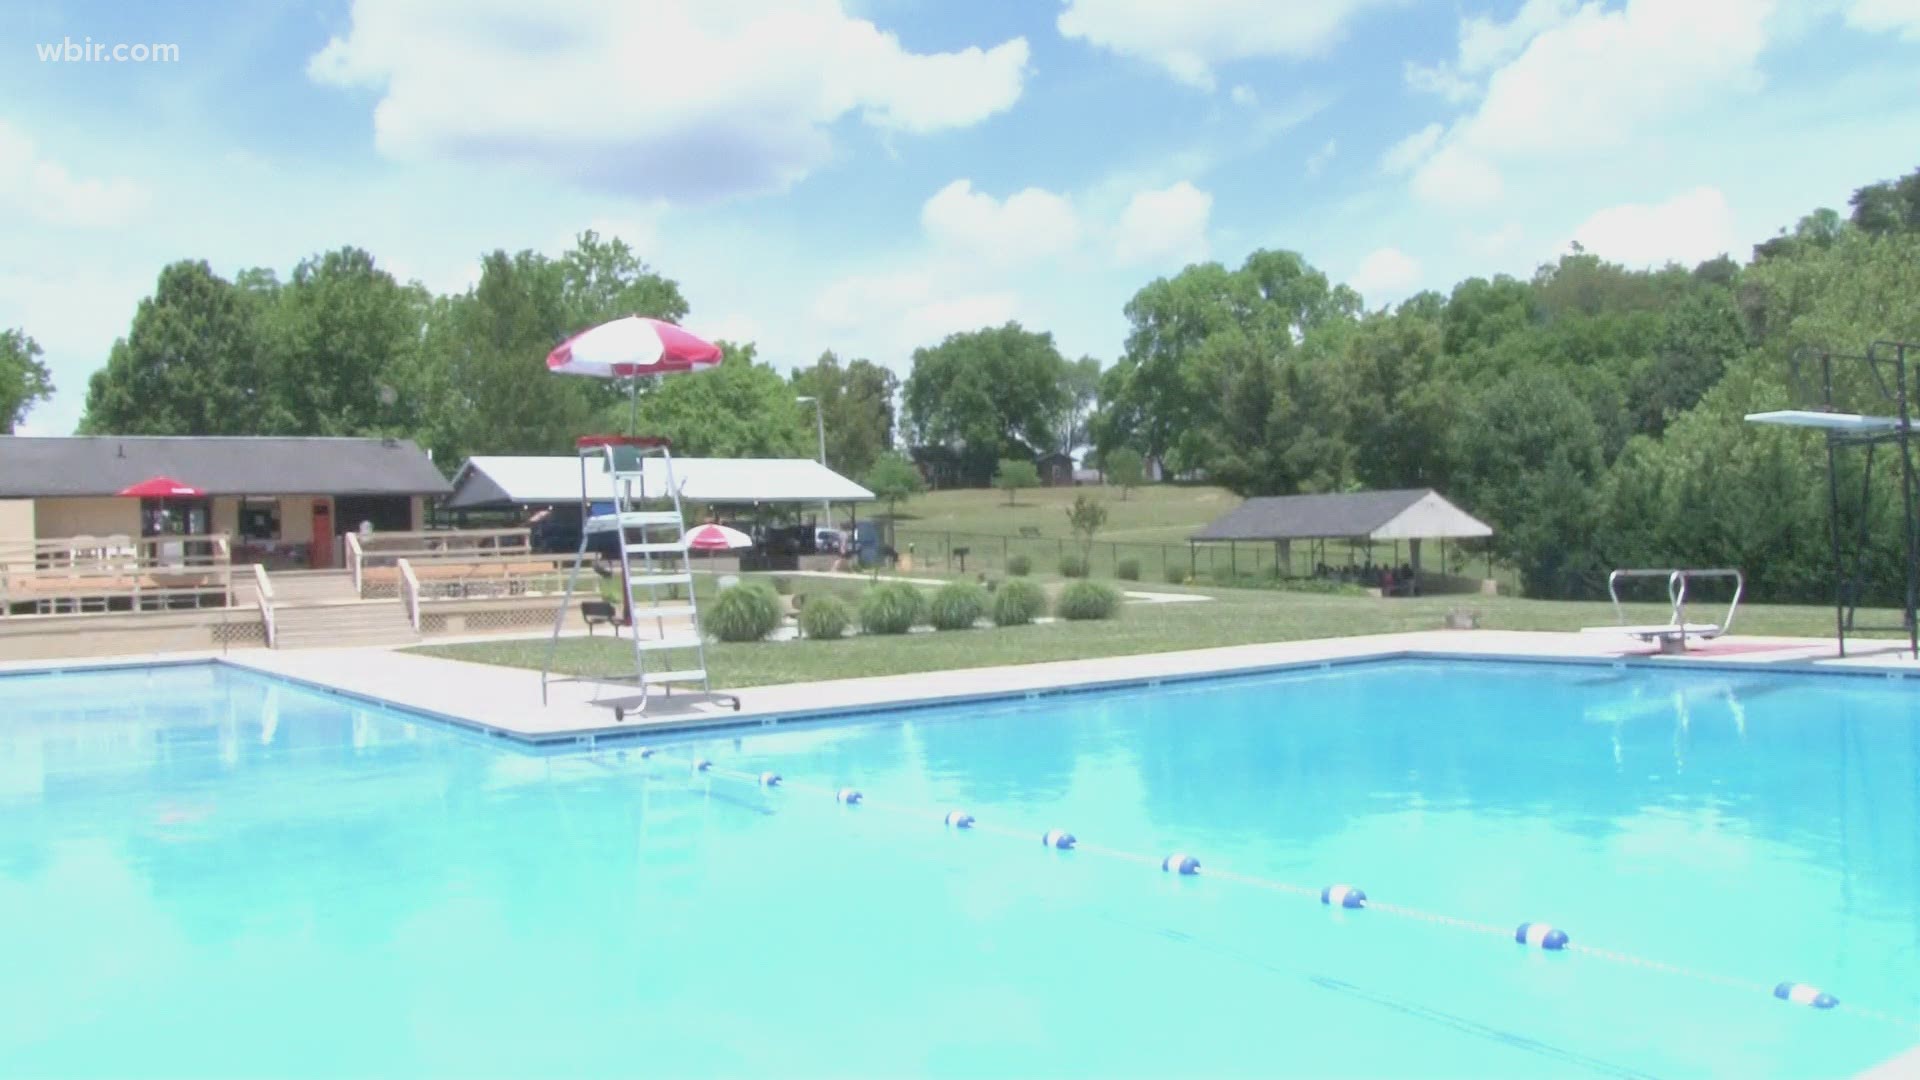 With warm weather underway, community pools are expected to reopen this weekend for Memorial Day.